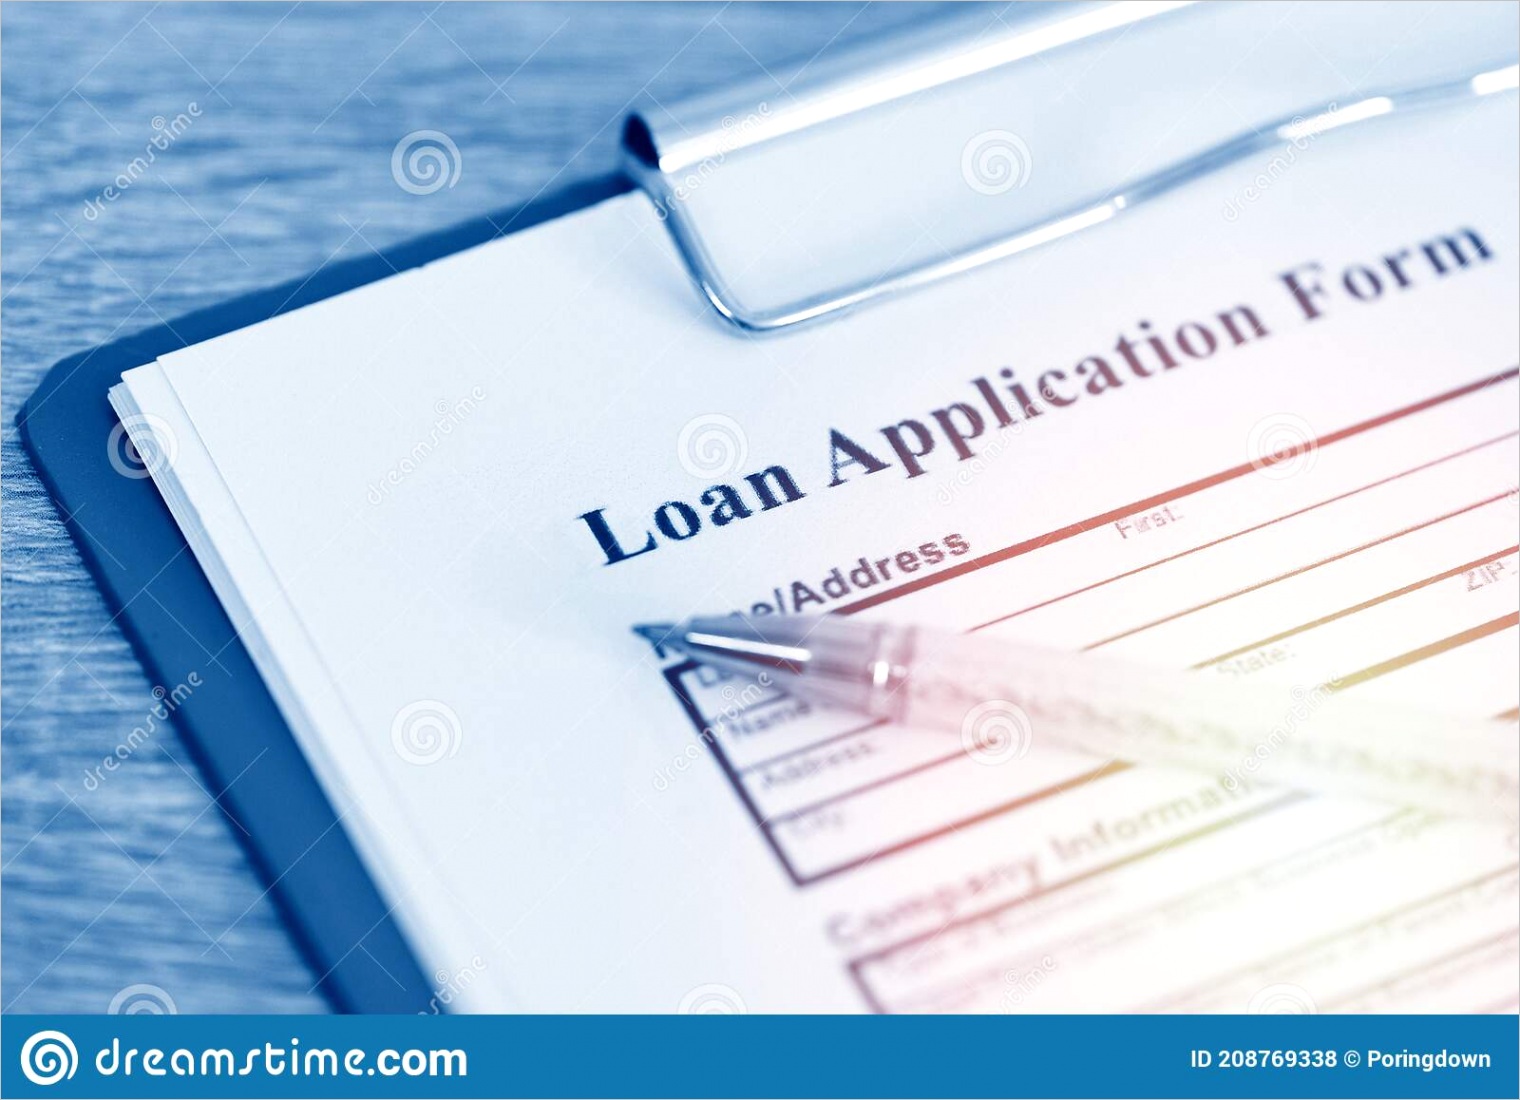 loan application form financial money contract agreement pany credit person image